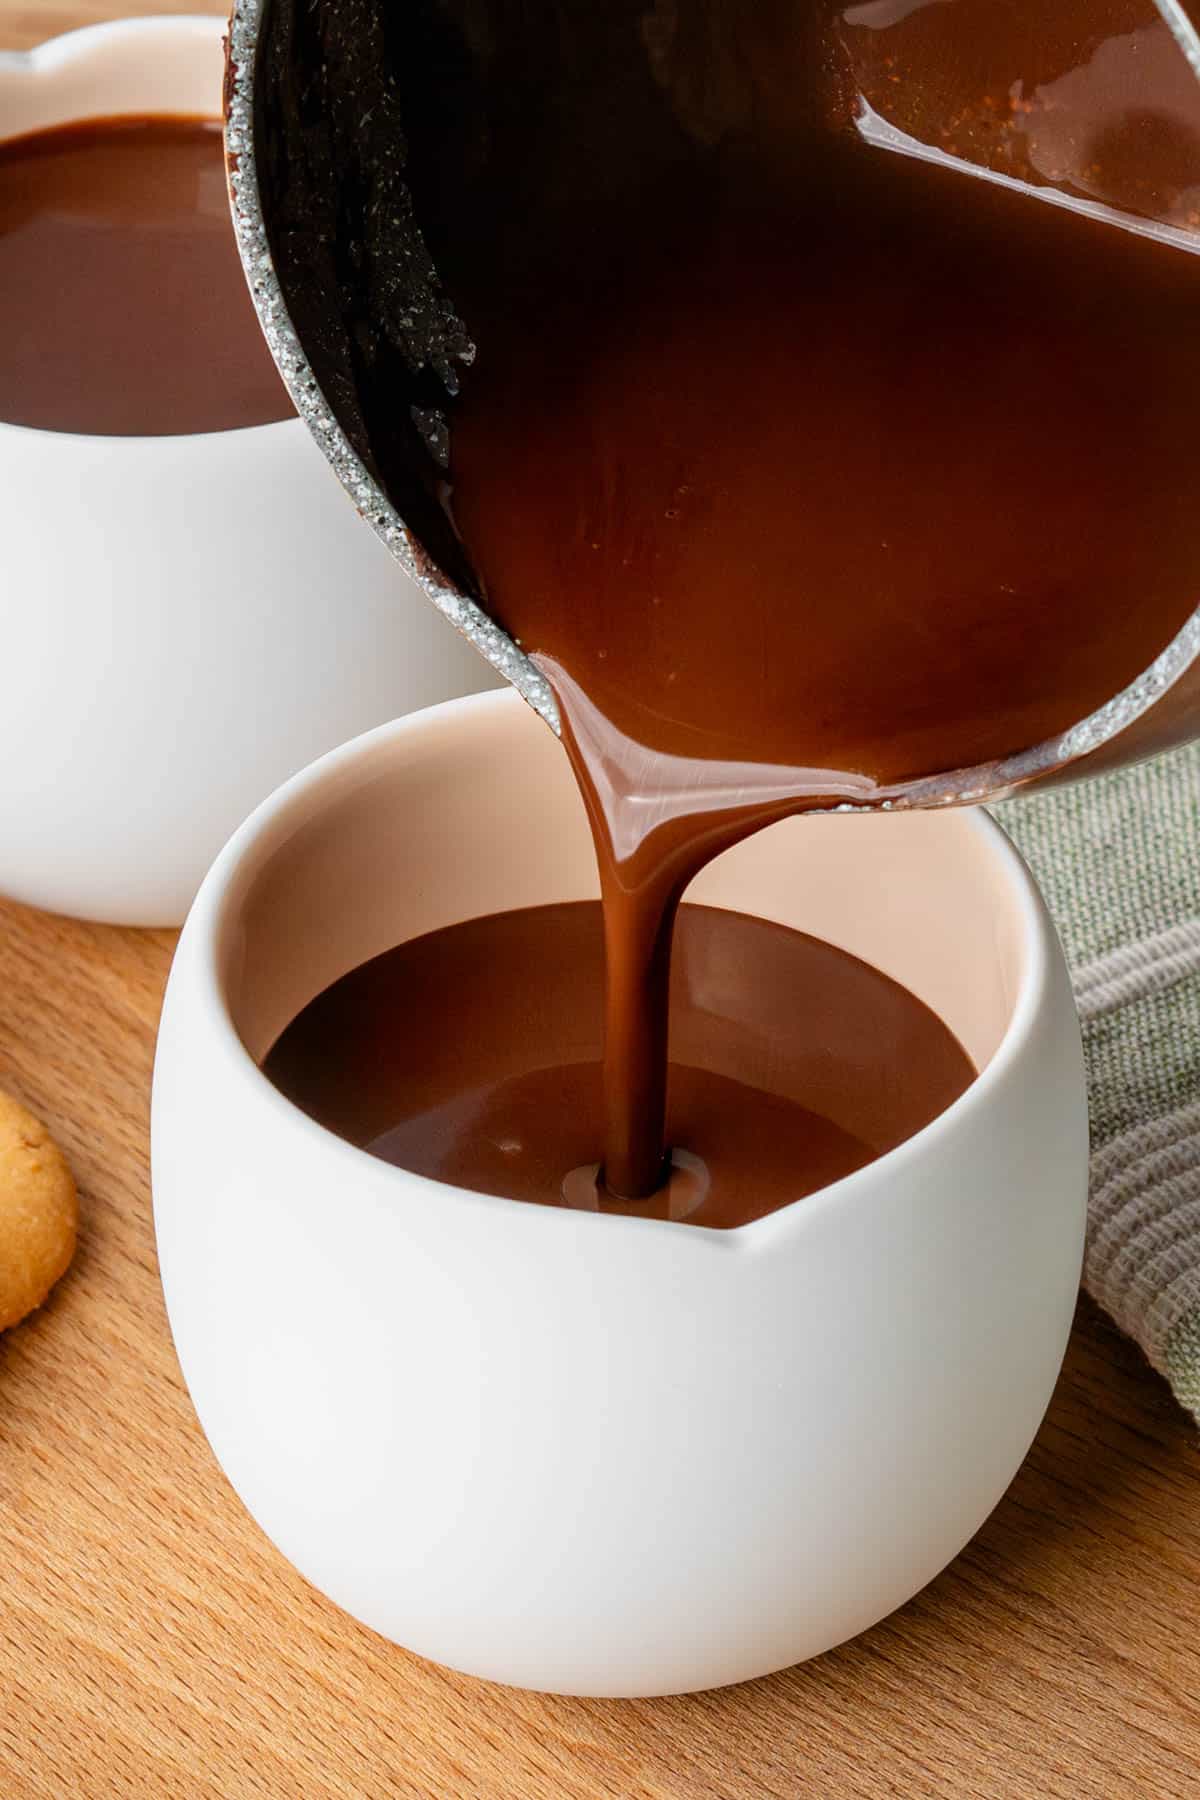 Pot of Italian Hot Chocolate being poured into a mug